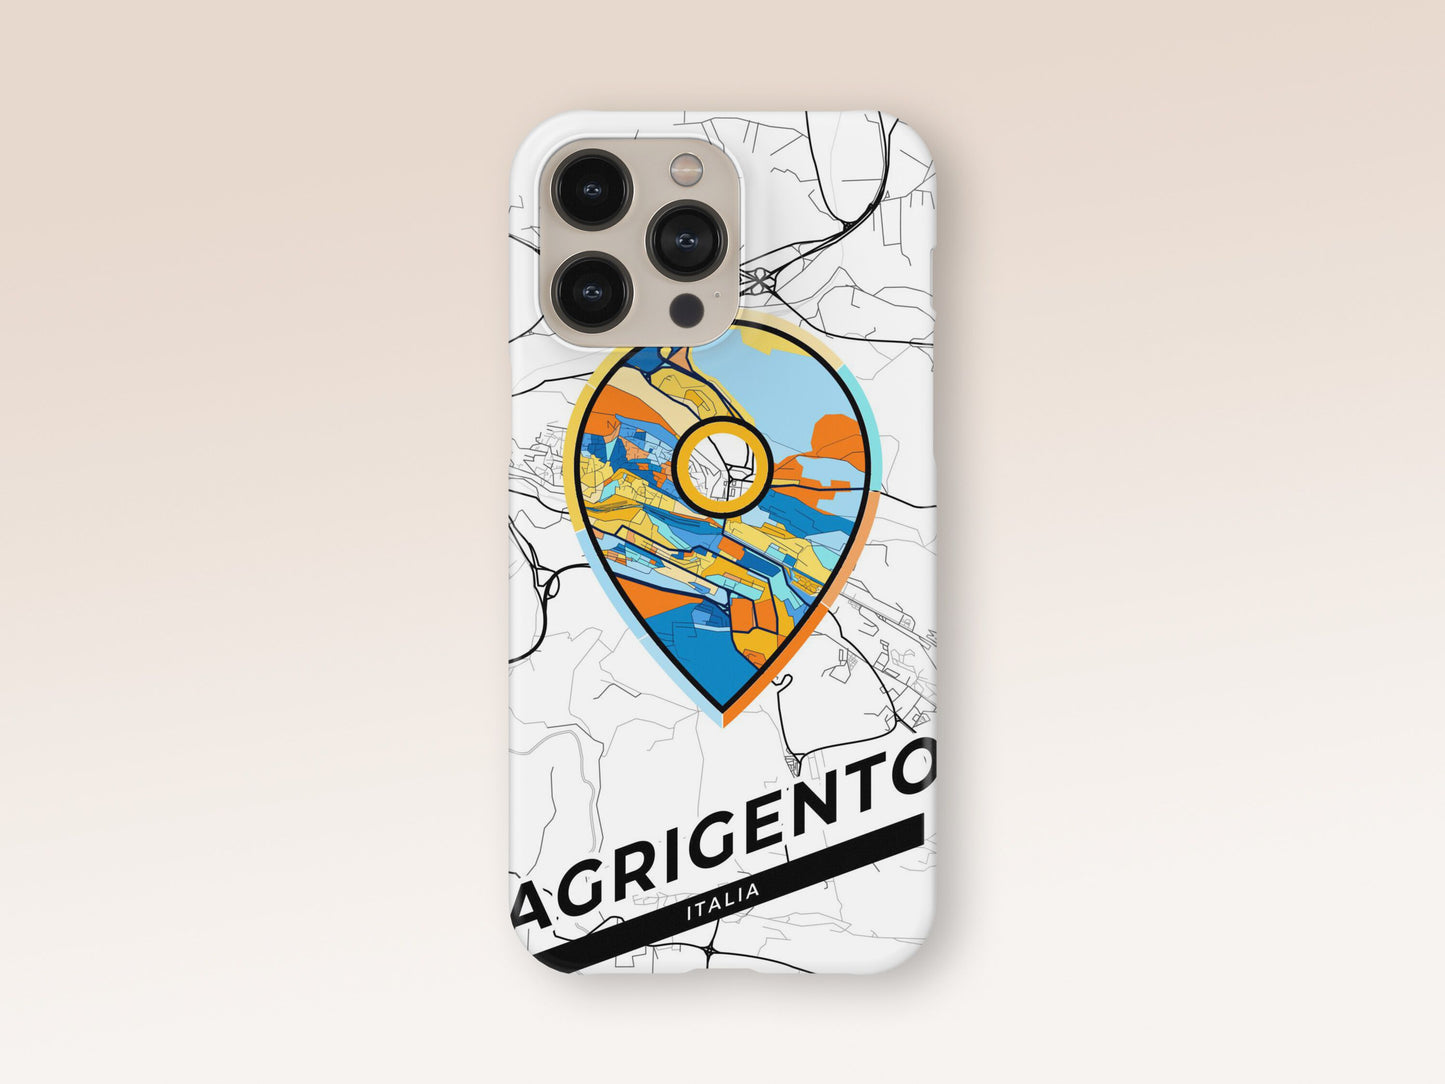 Agrigento Italy slim phone case with colorful icon. Birthday, wedding or housewarming gift. Couple match cases. 1